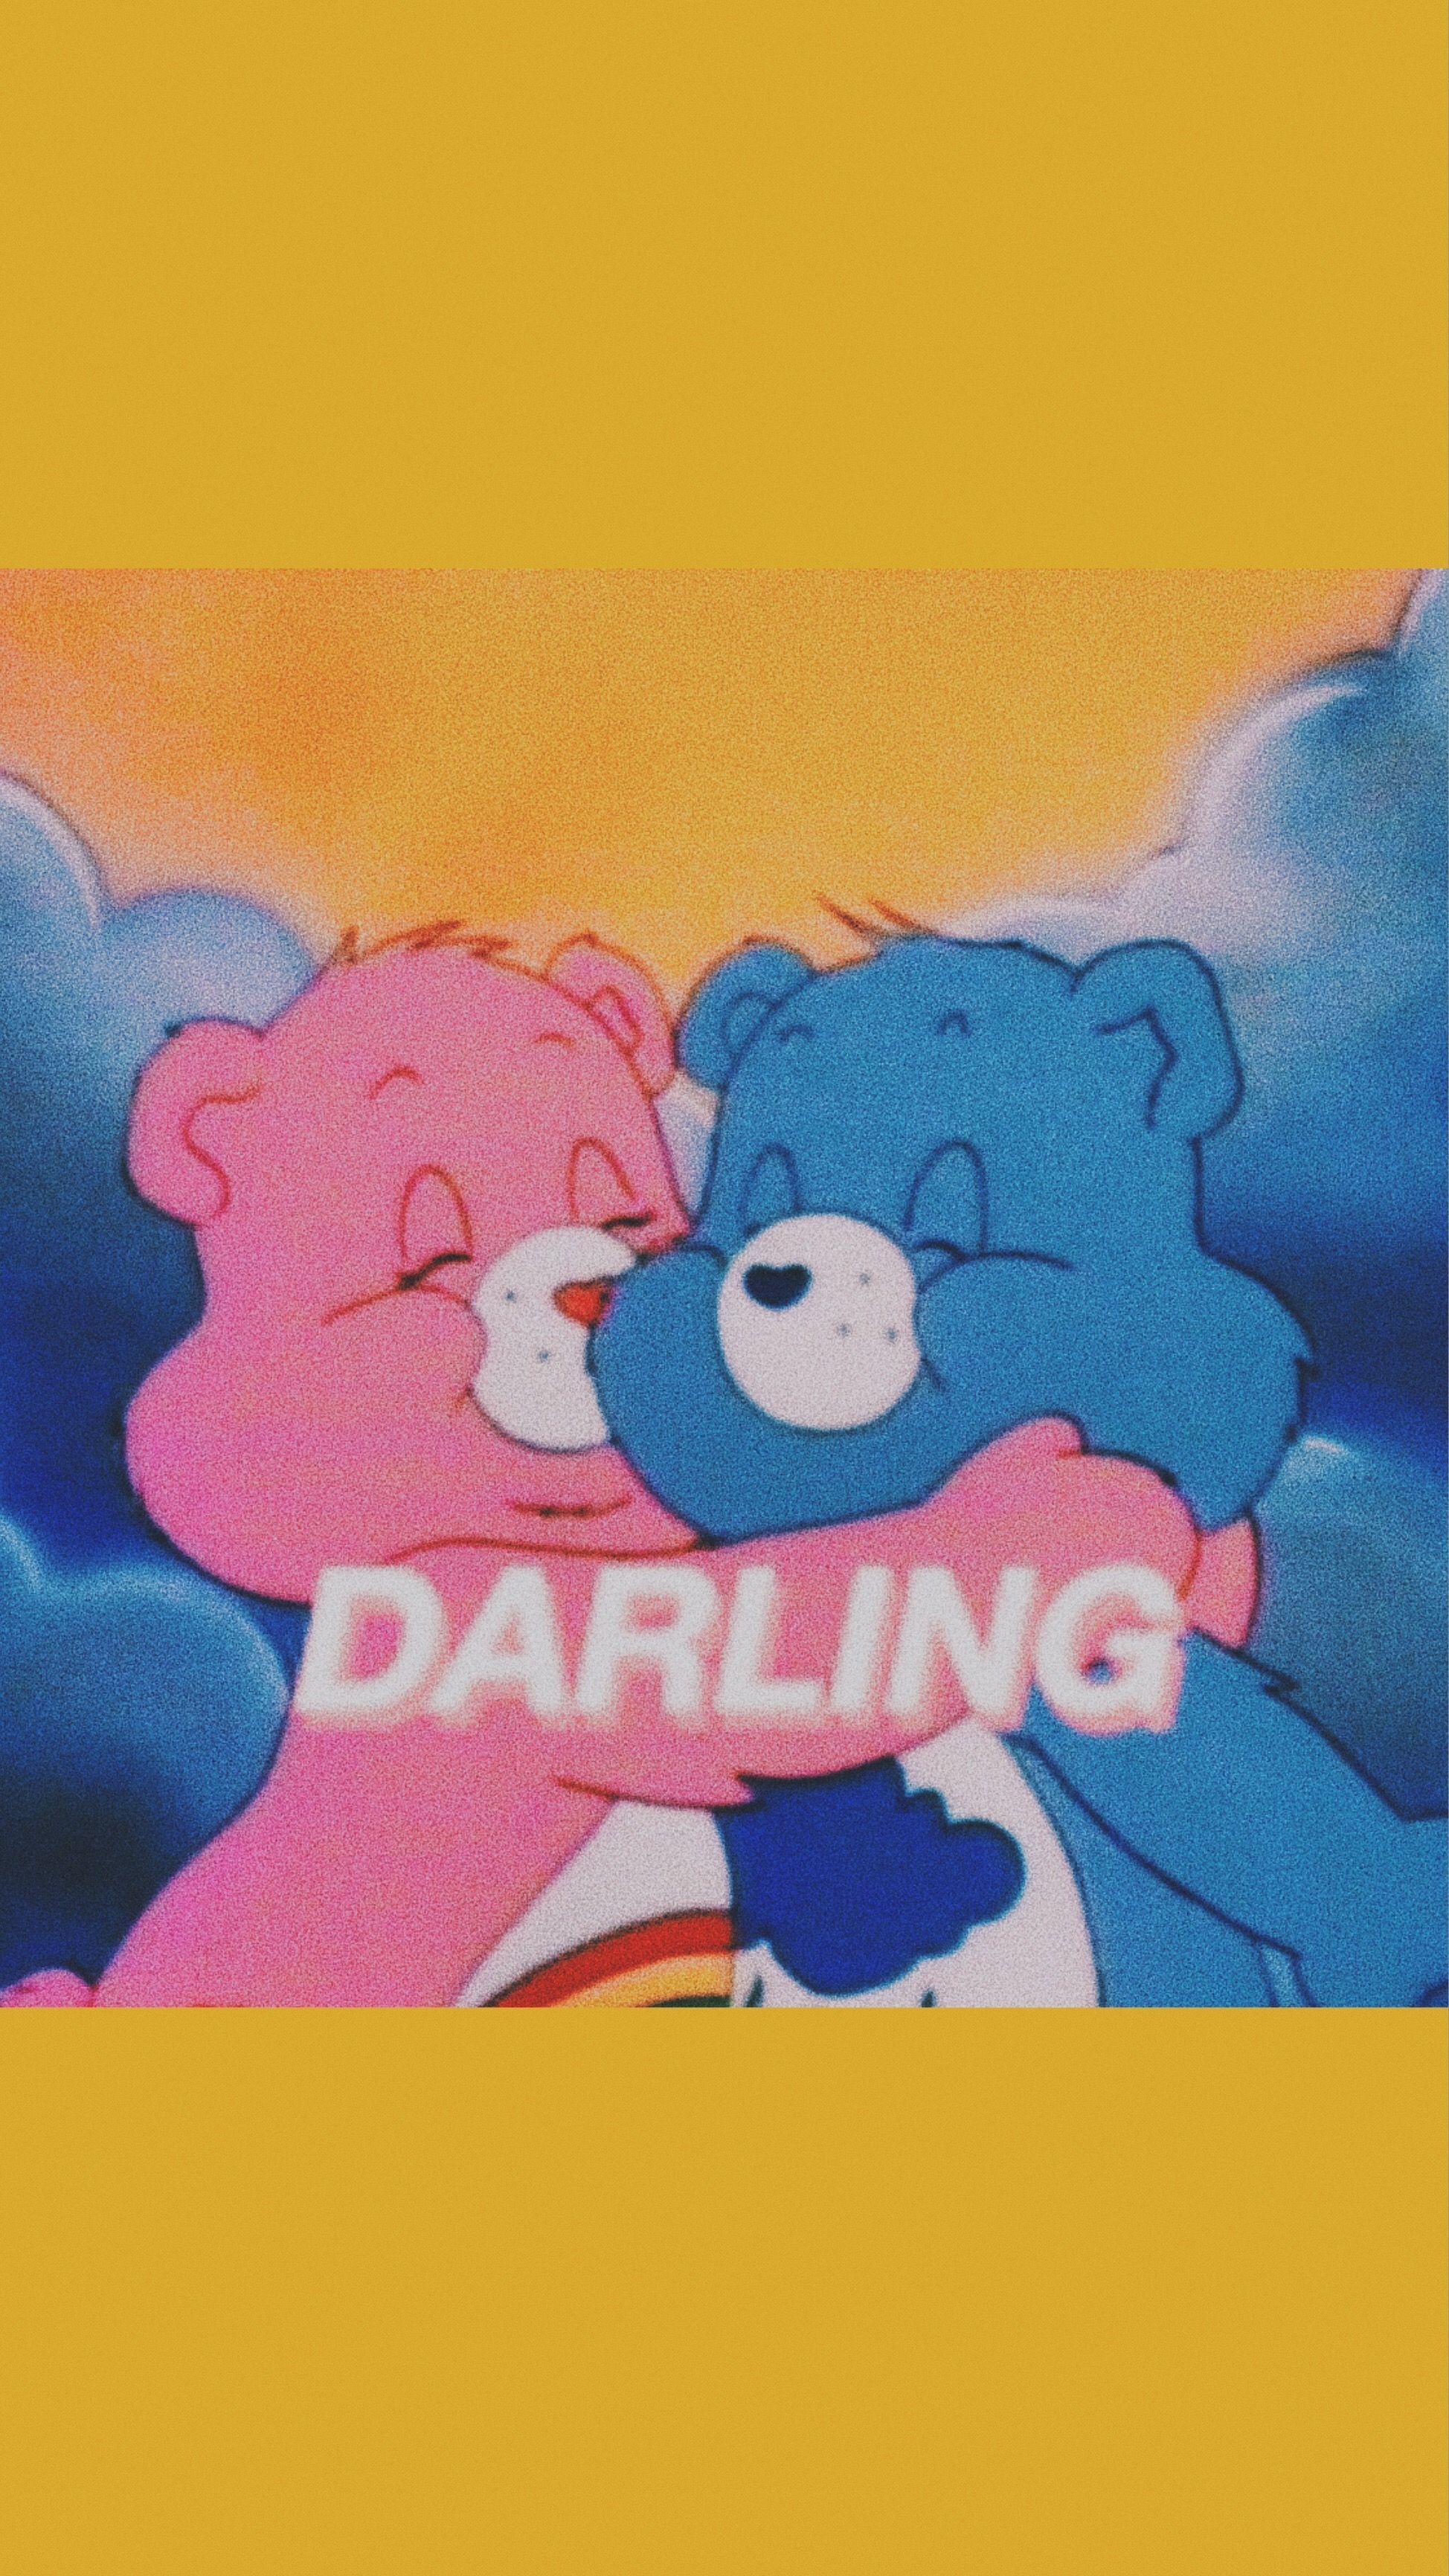 A poster of two teddy bears hugging - Care Bears